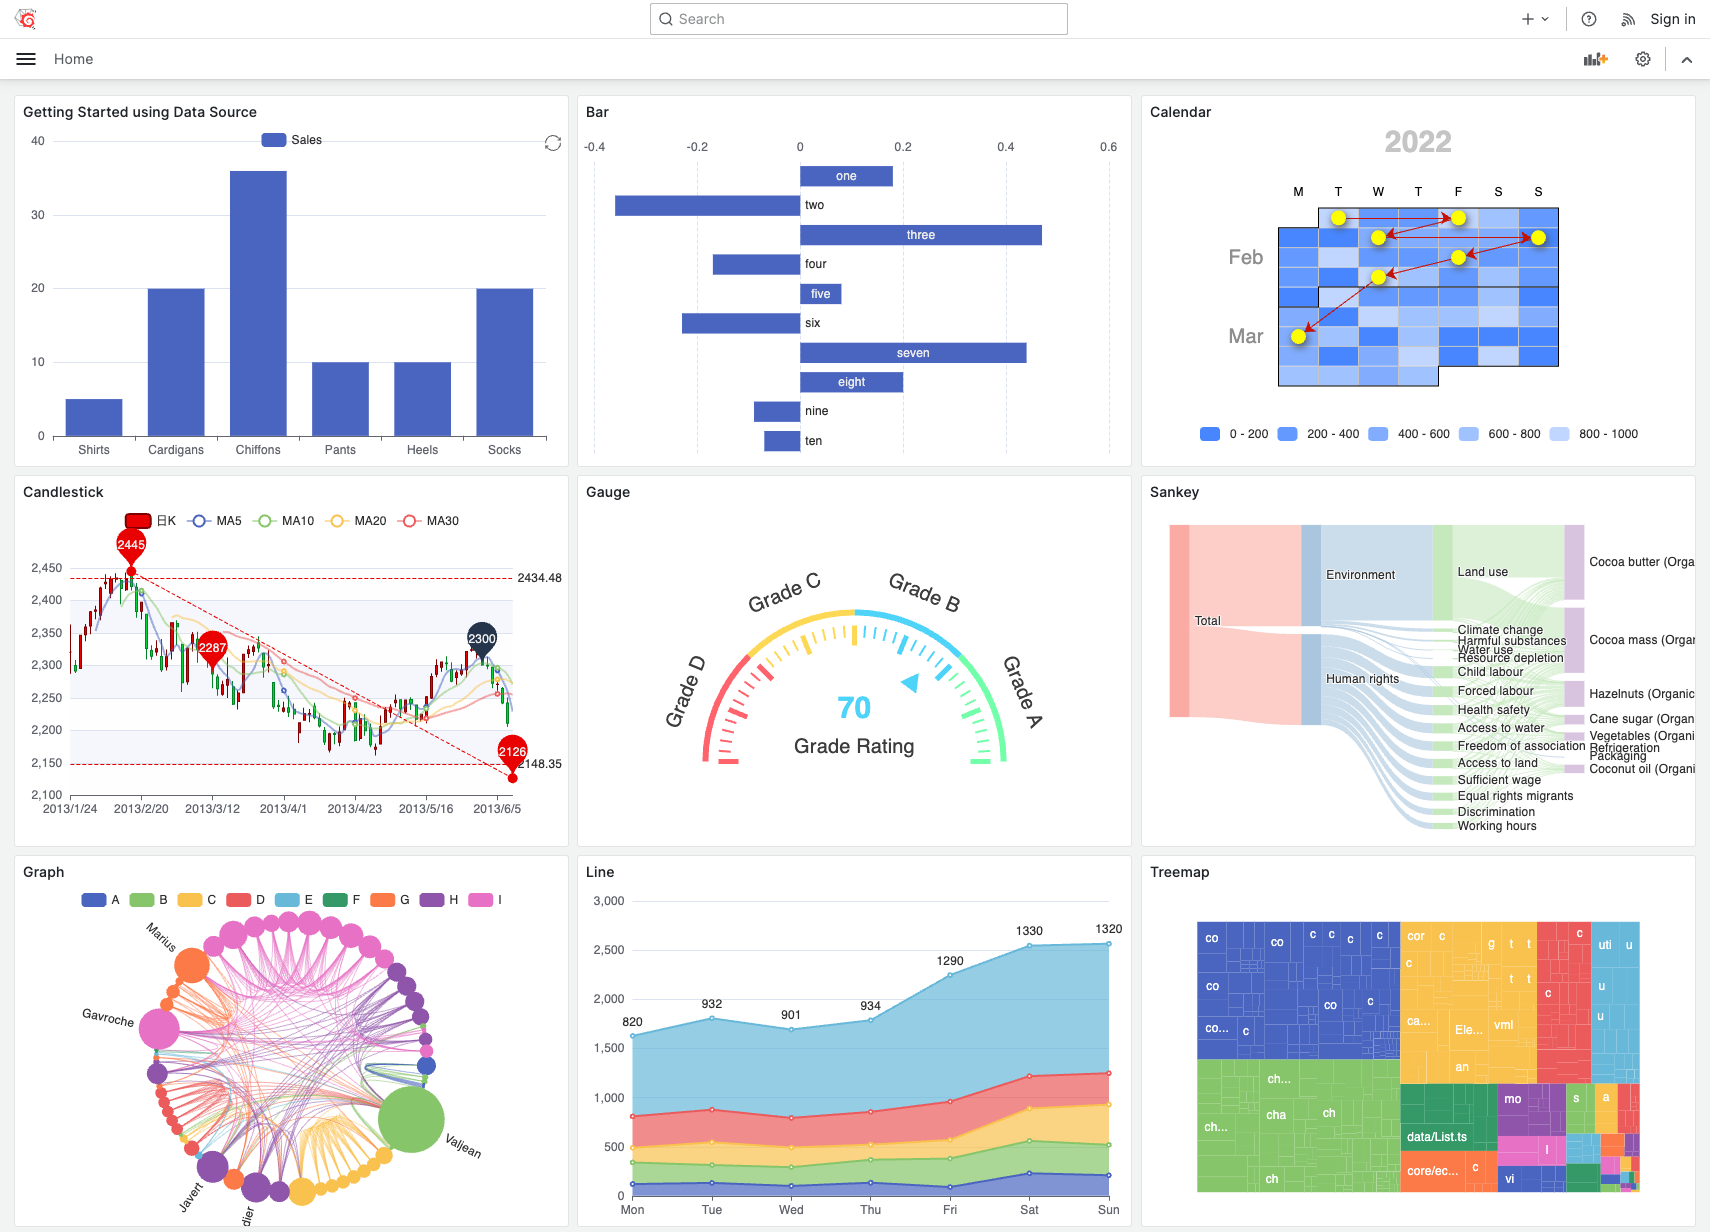 Apache ECharts offers an easy way of adding intuitive, interactive, and highly customizable charts.